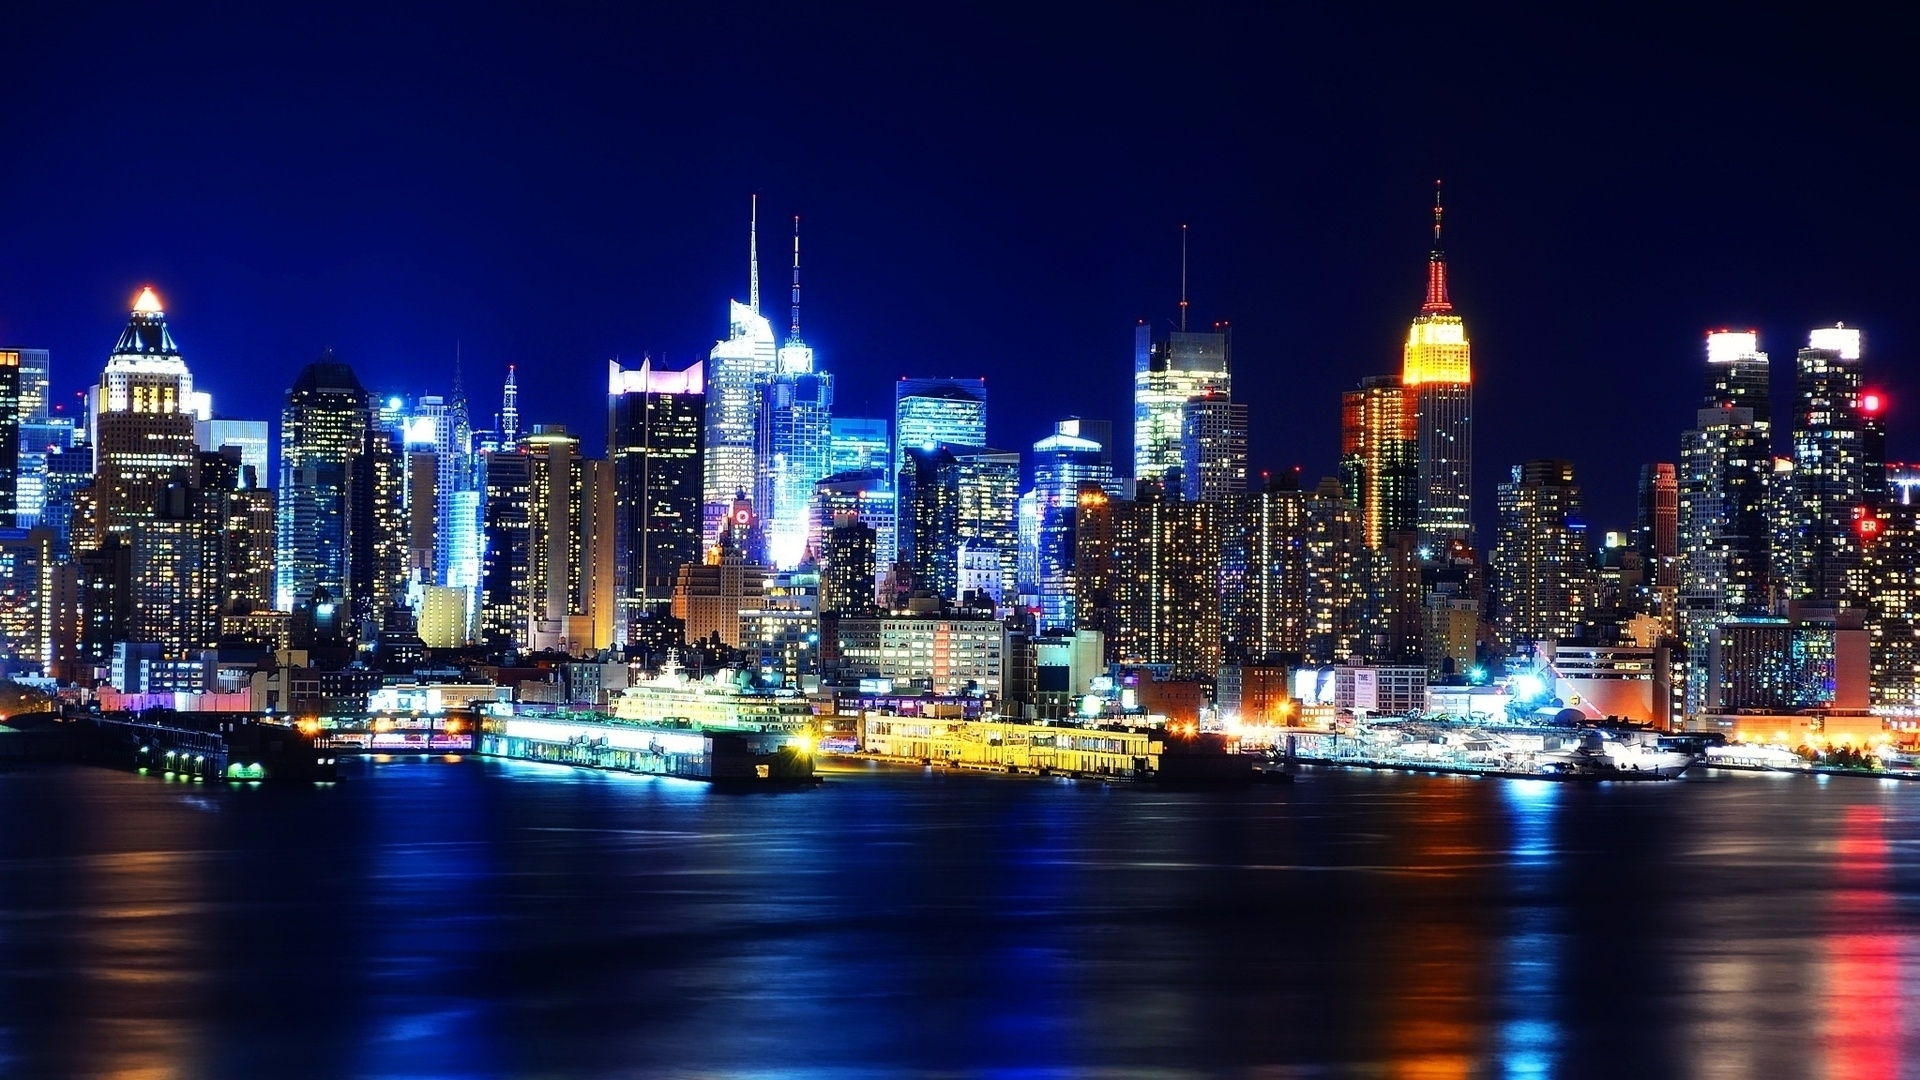 full hd 1080p new york wallpapers hd, desktop backgrounds | images